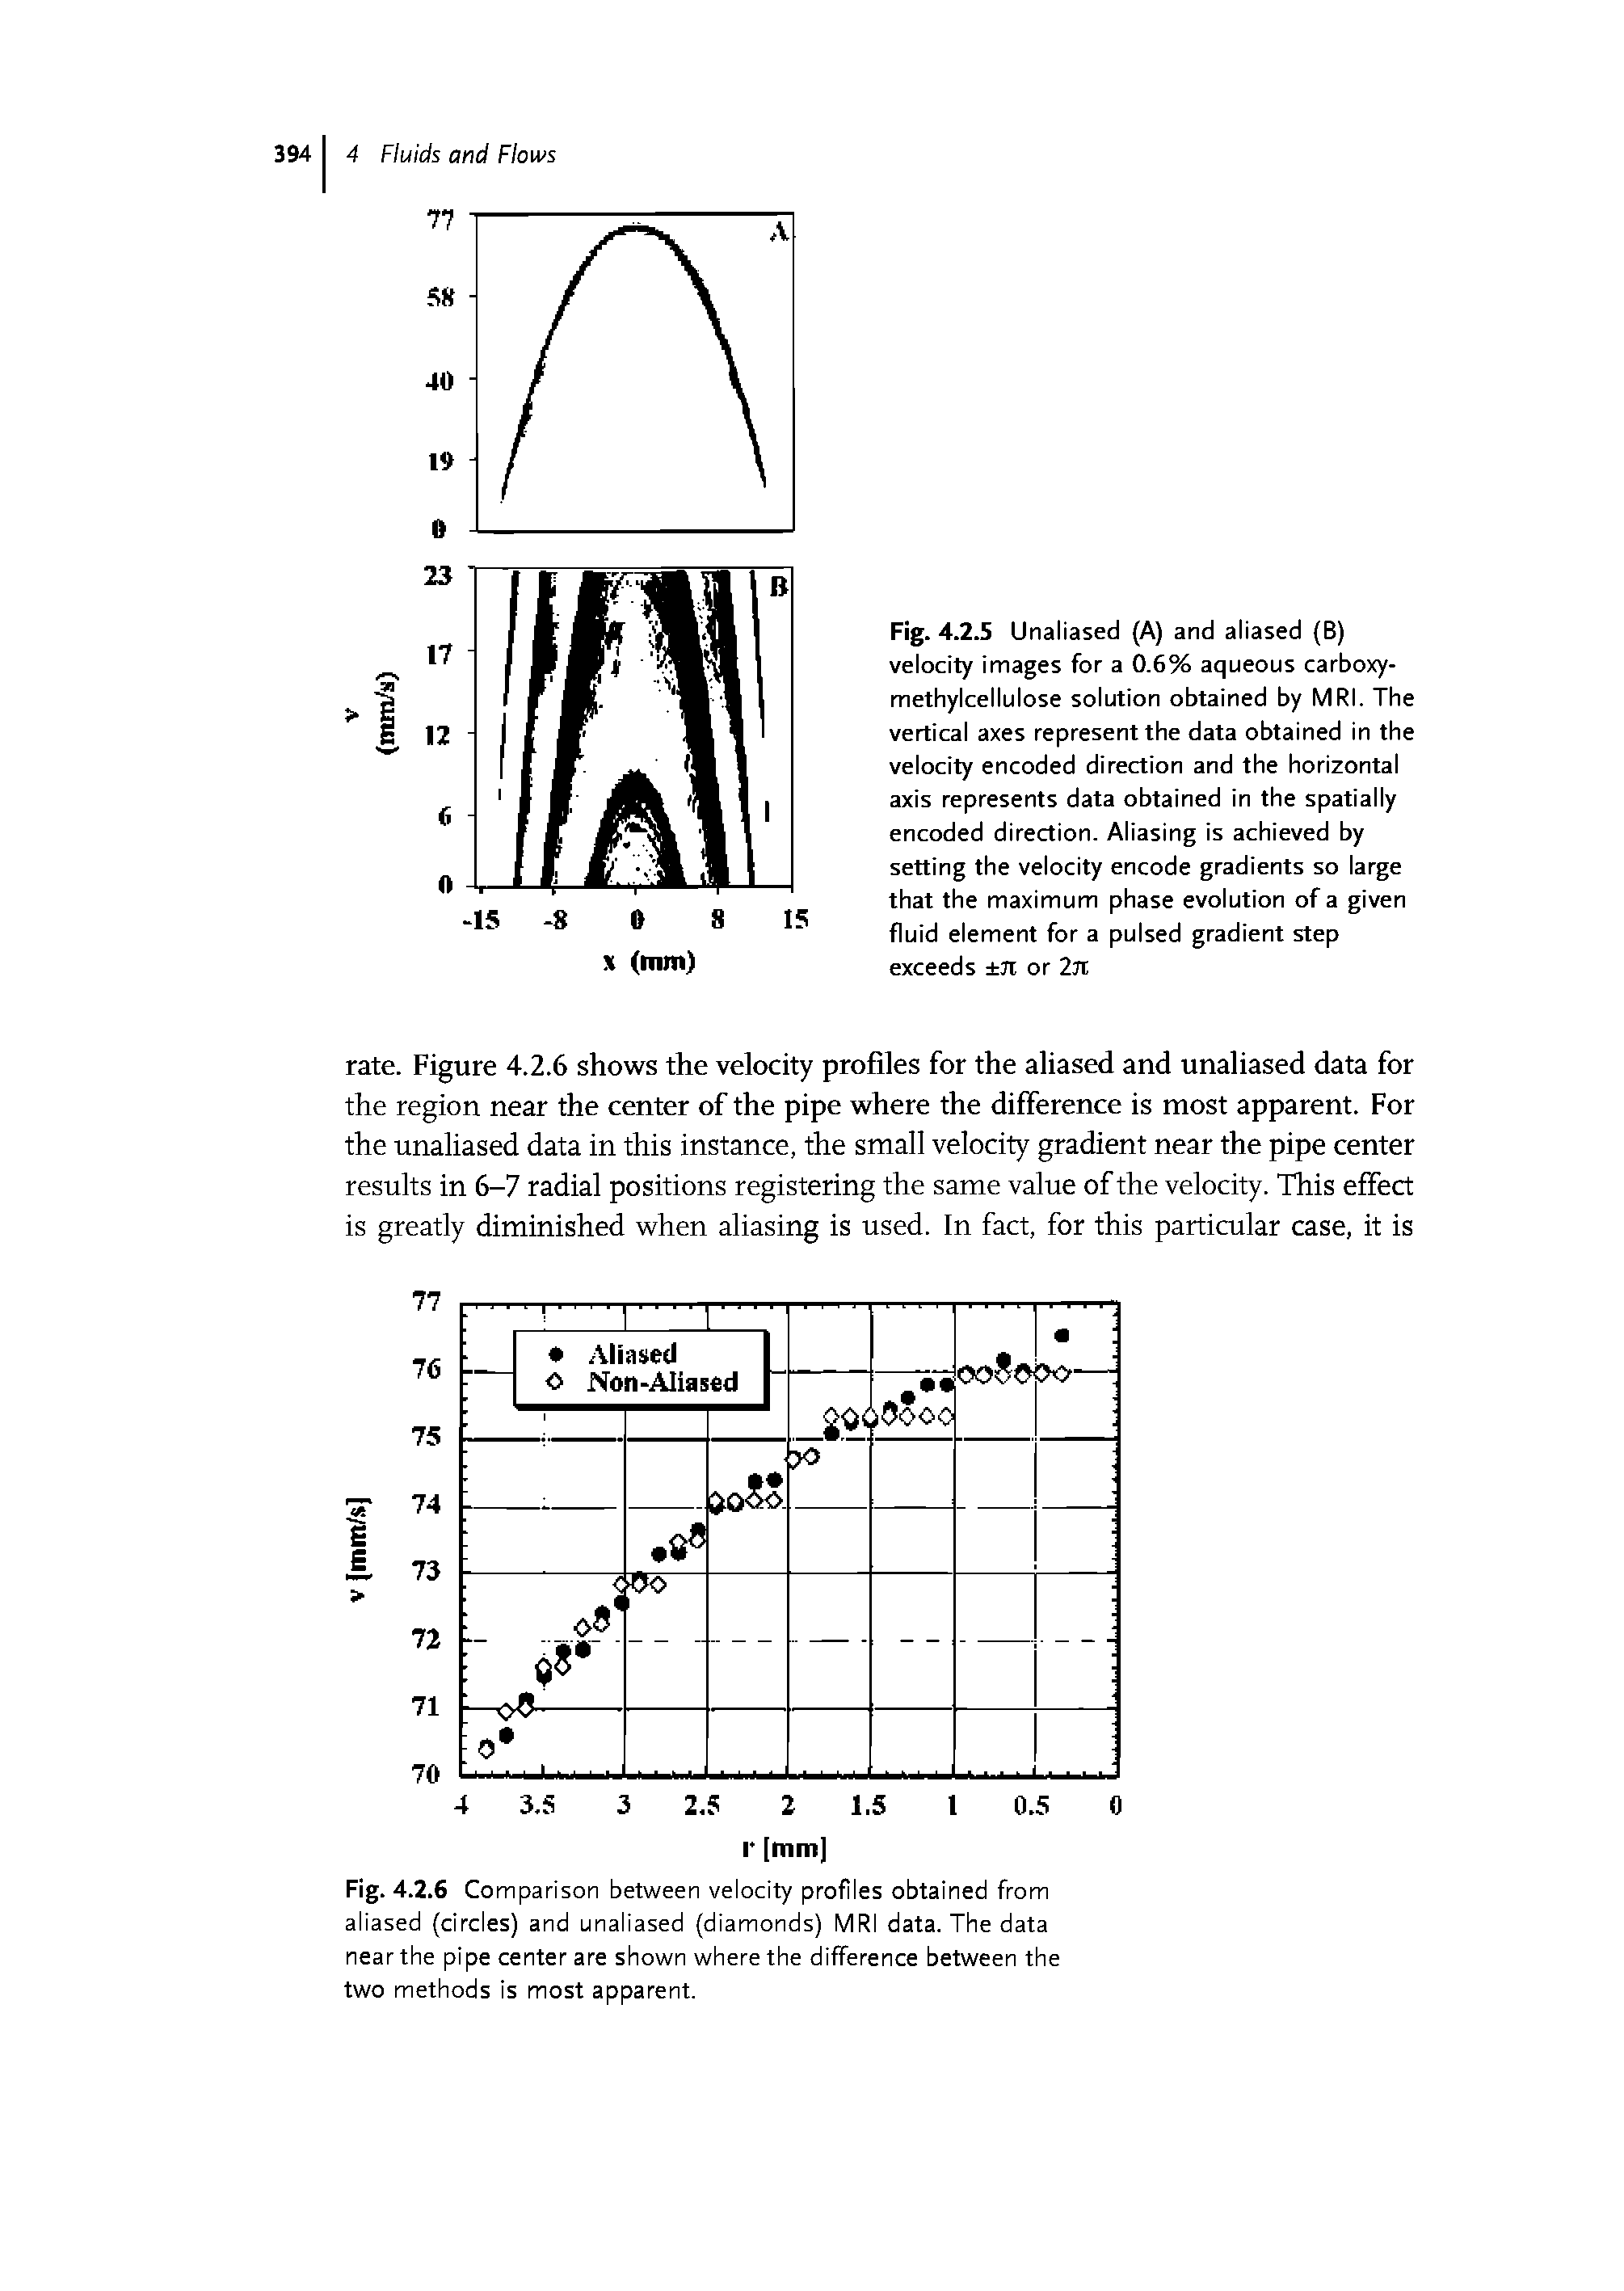 Fig. 4.2.5 Unaliased (A) and aliased (B) velocity images for a 0.6% aqueous carboxy-methylcellulose solution obtained by MRI. The vertical axes represent the data obtained in the velocity encoded direction and the horizontal axis represents data obtained in the spatially encoded direction. Aliasing is achieved by setting the velocity encode gradients so large that the maximum phase evolution of a given fluid element for a pulsed gradient step exceeds Ji or 2jt...